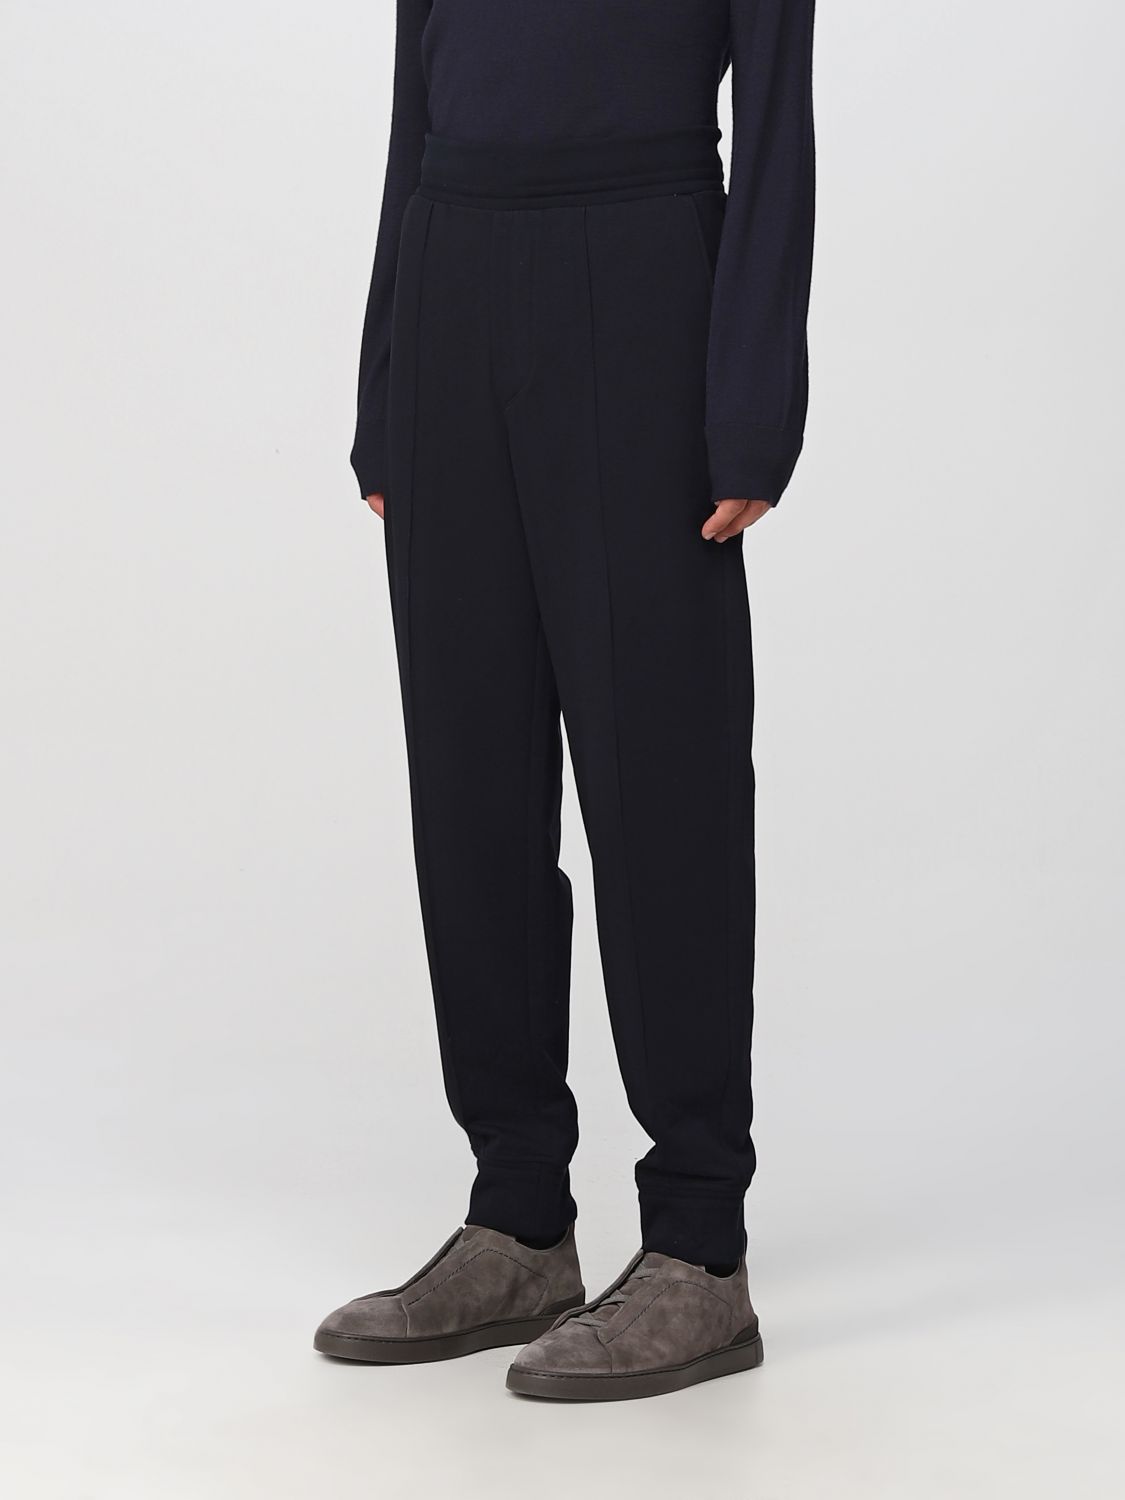 Trousers Zegna: Zegna trousers for men blue 3